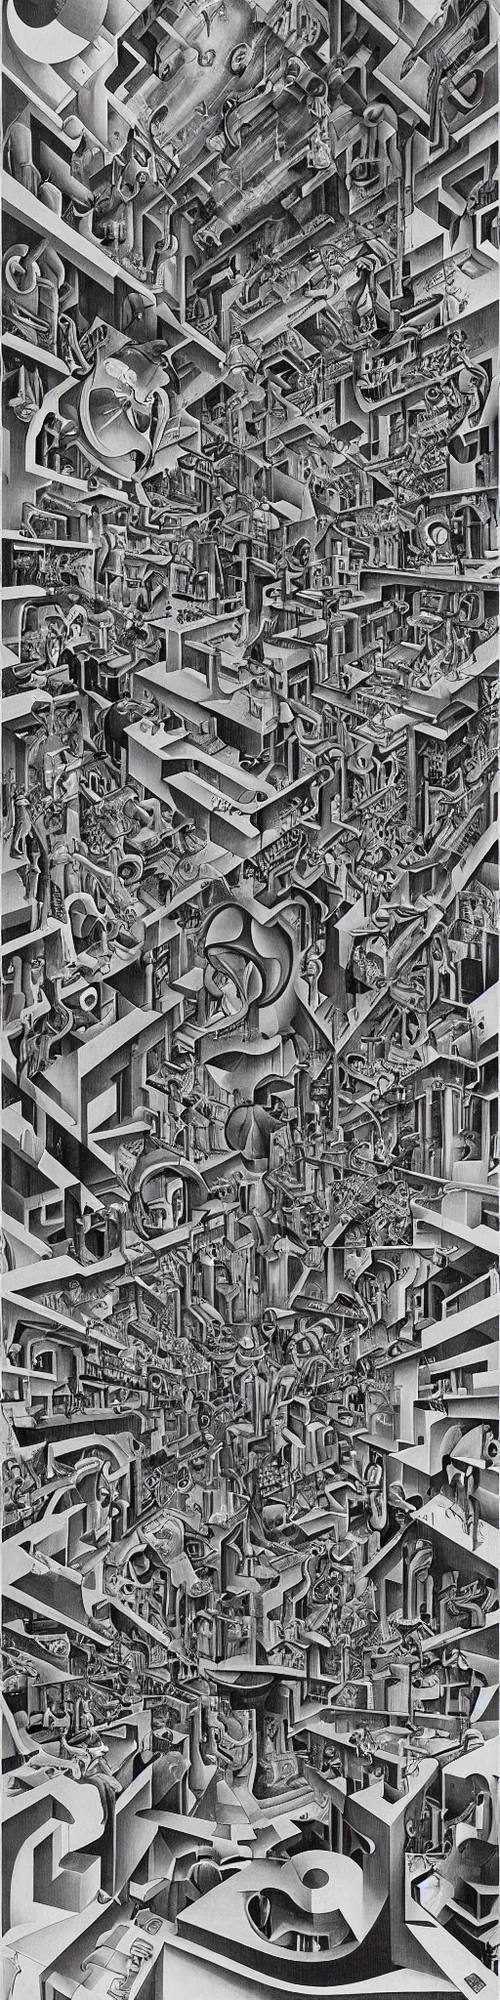 Prompt: epic mural of technological change through history by marcus akinlana, basil wolverton, mc escher, dali, picasso, hr giger, wheres waldo, cybernetic river of transformation